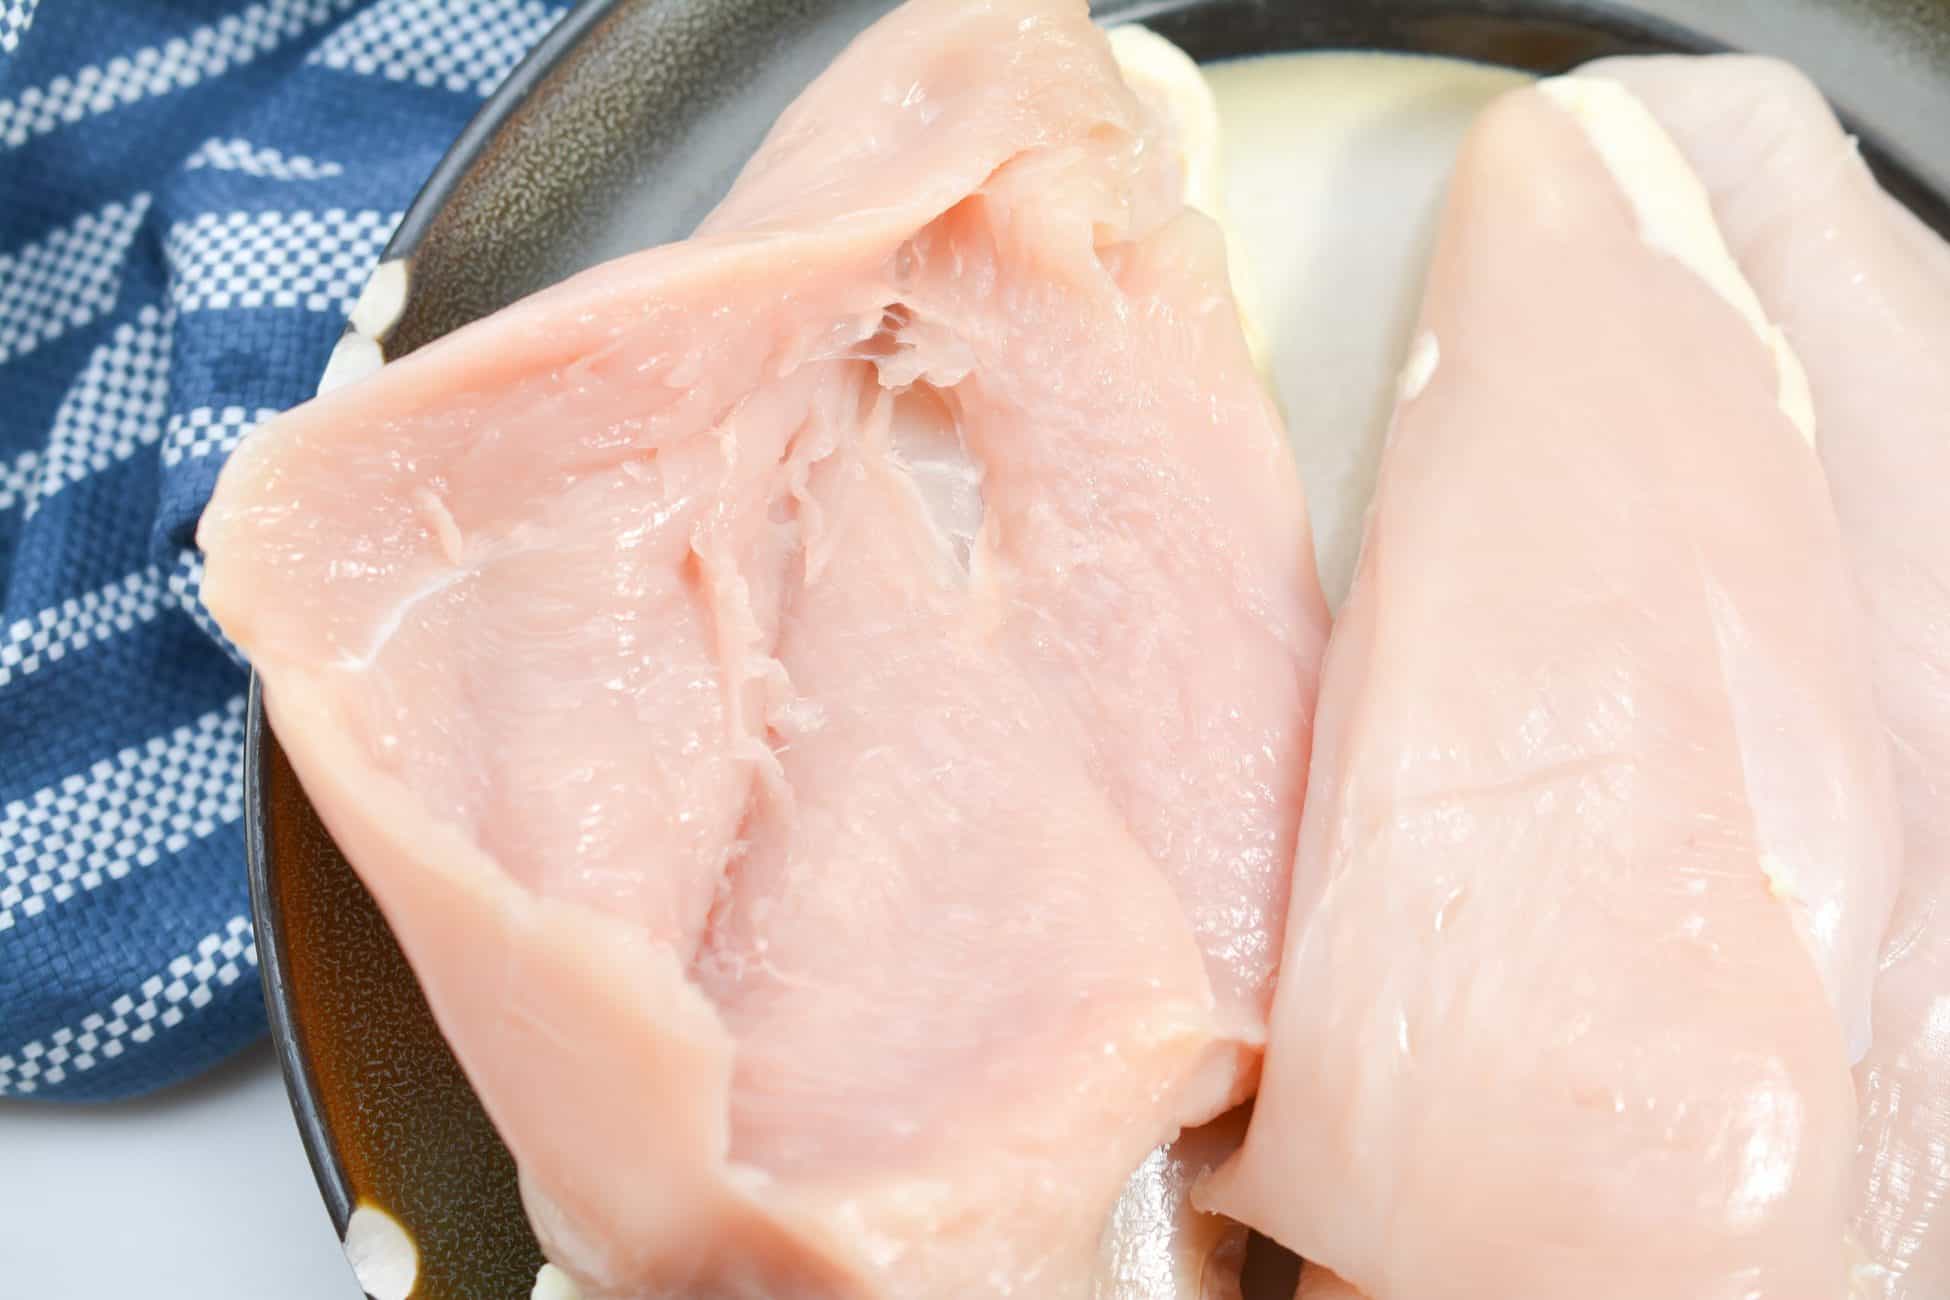  Slice a pocket into the middle of the chicken breasts lengthwise. Be sure not to cut the chicken breasts completely through.